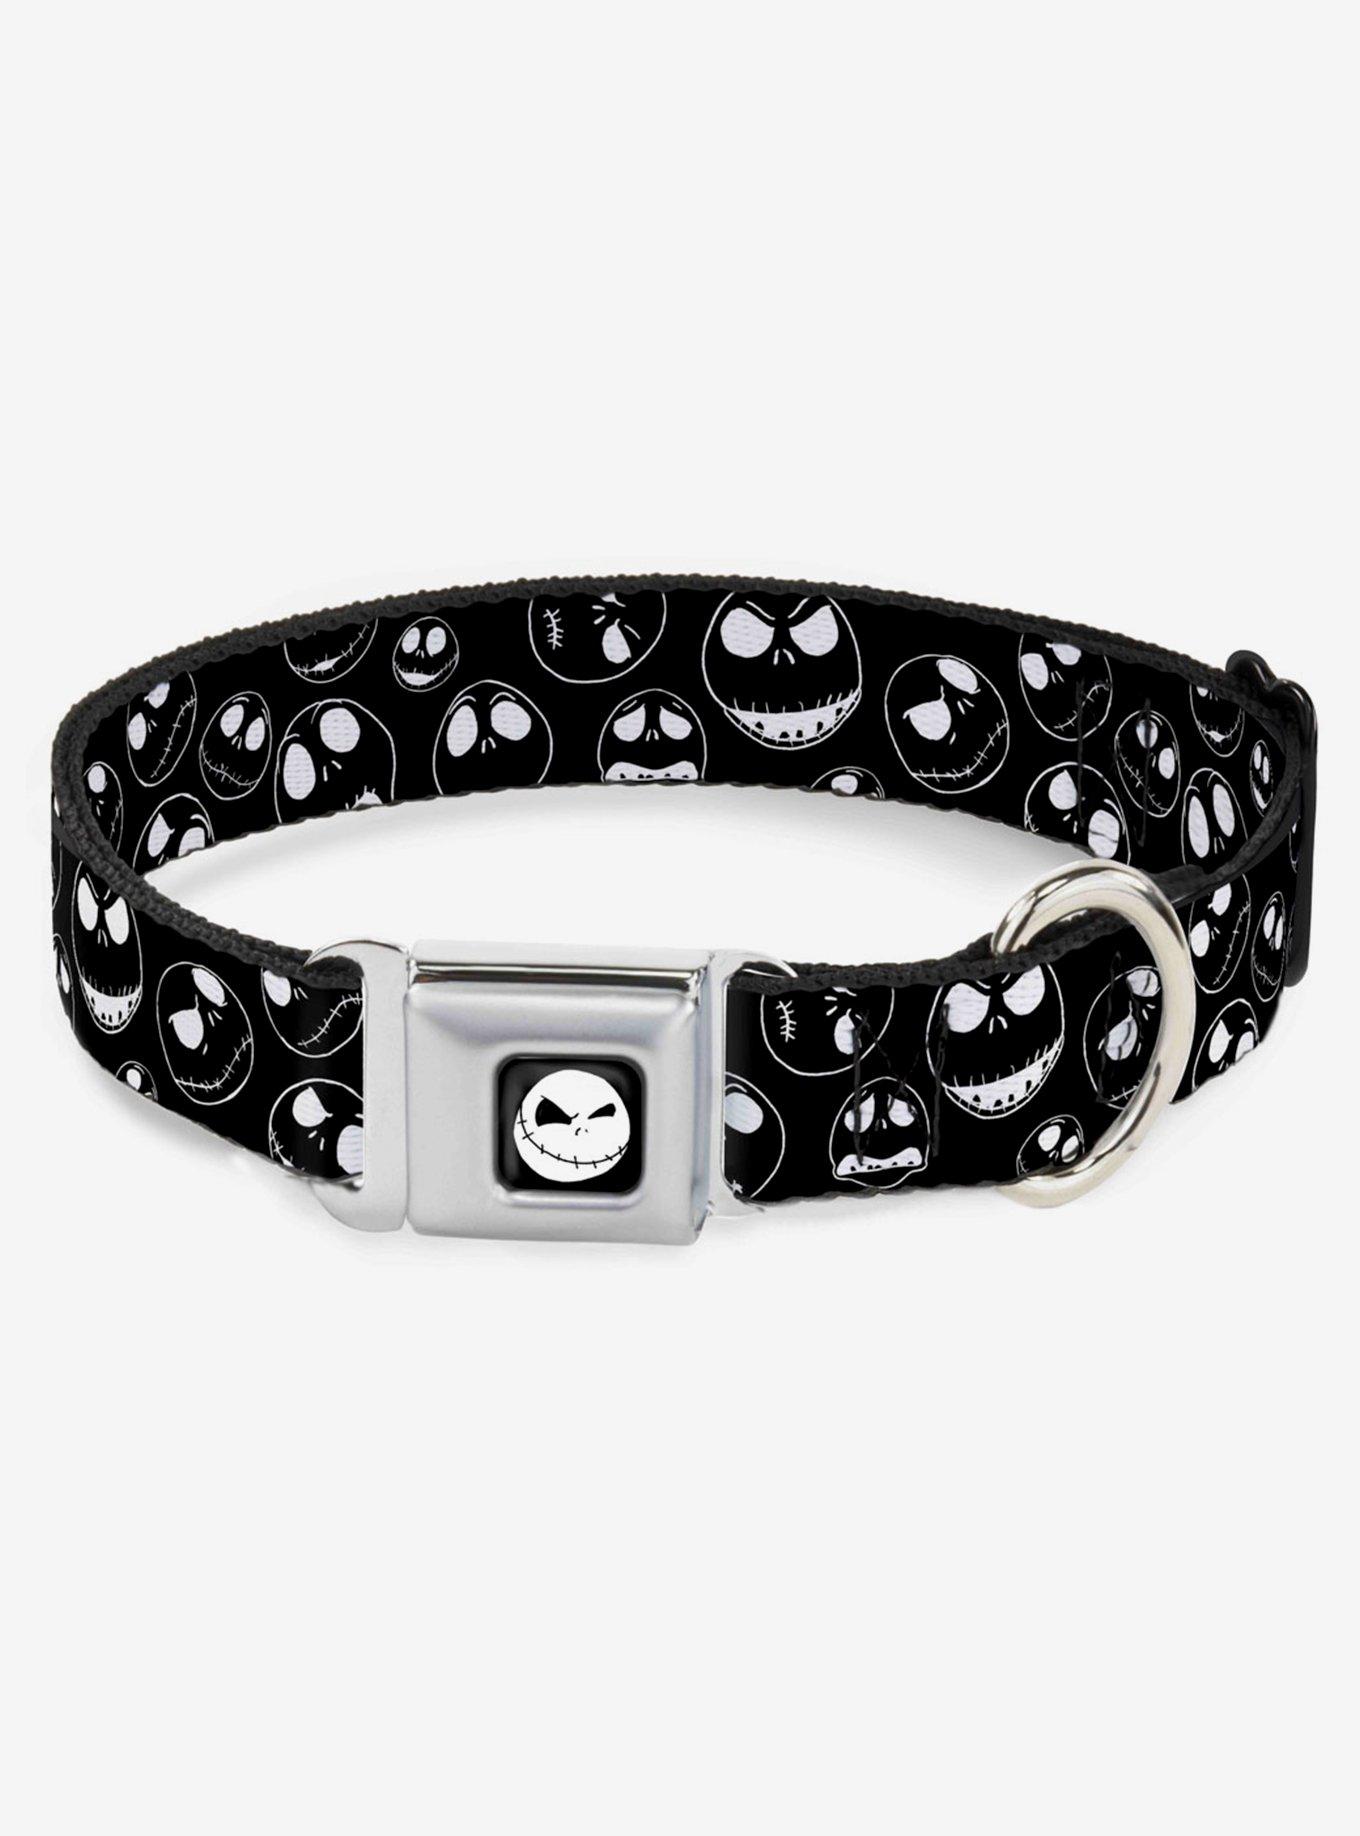 Disney Nightmare Before Christmas Jack Outline Expressions Seatbelt Buckle Dog Collar